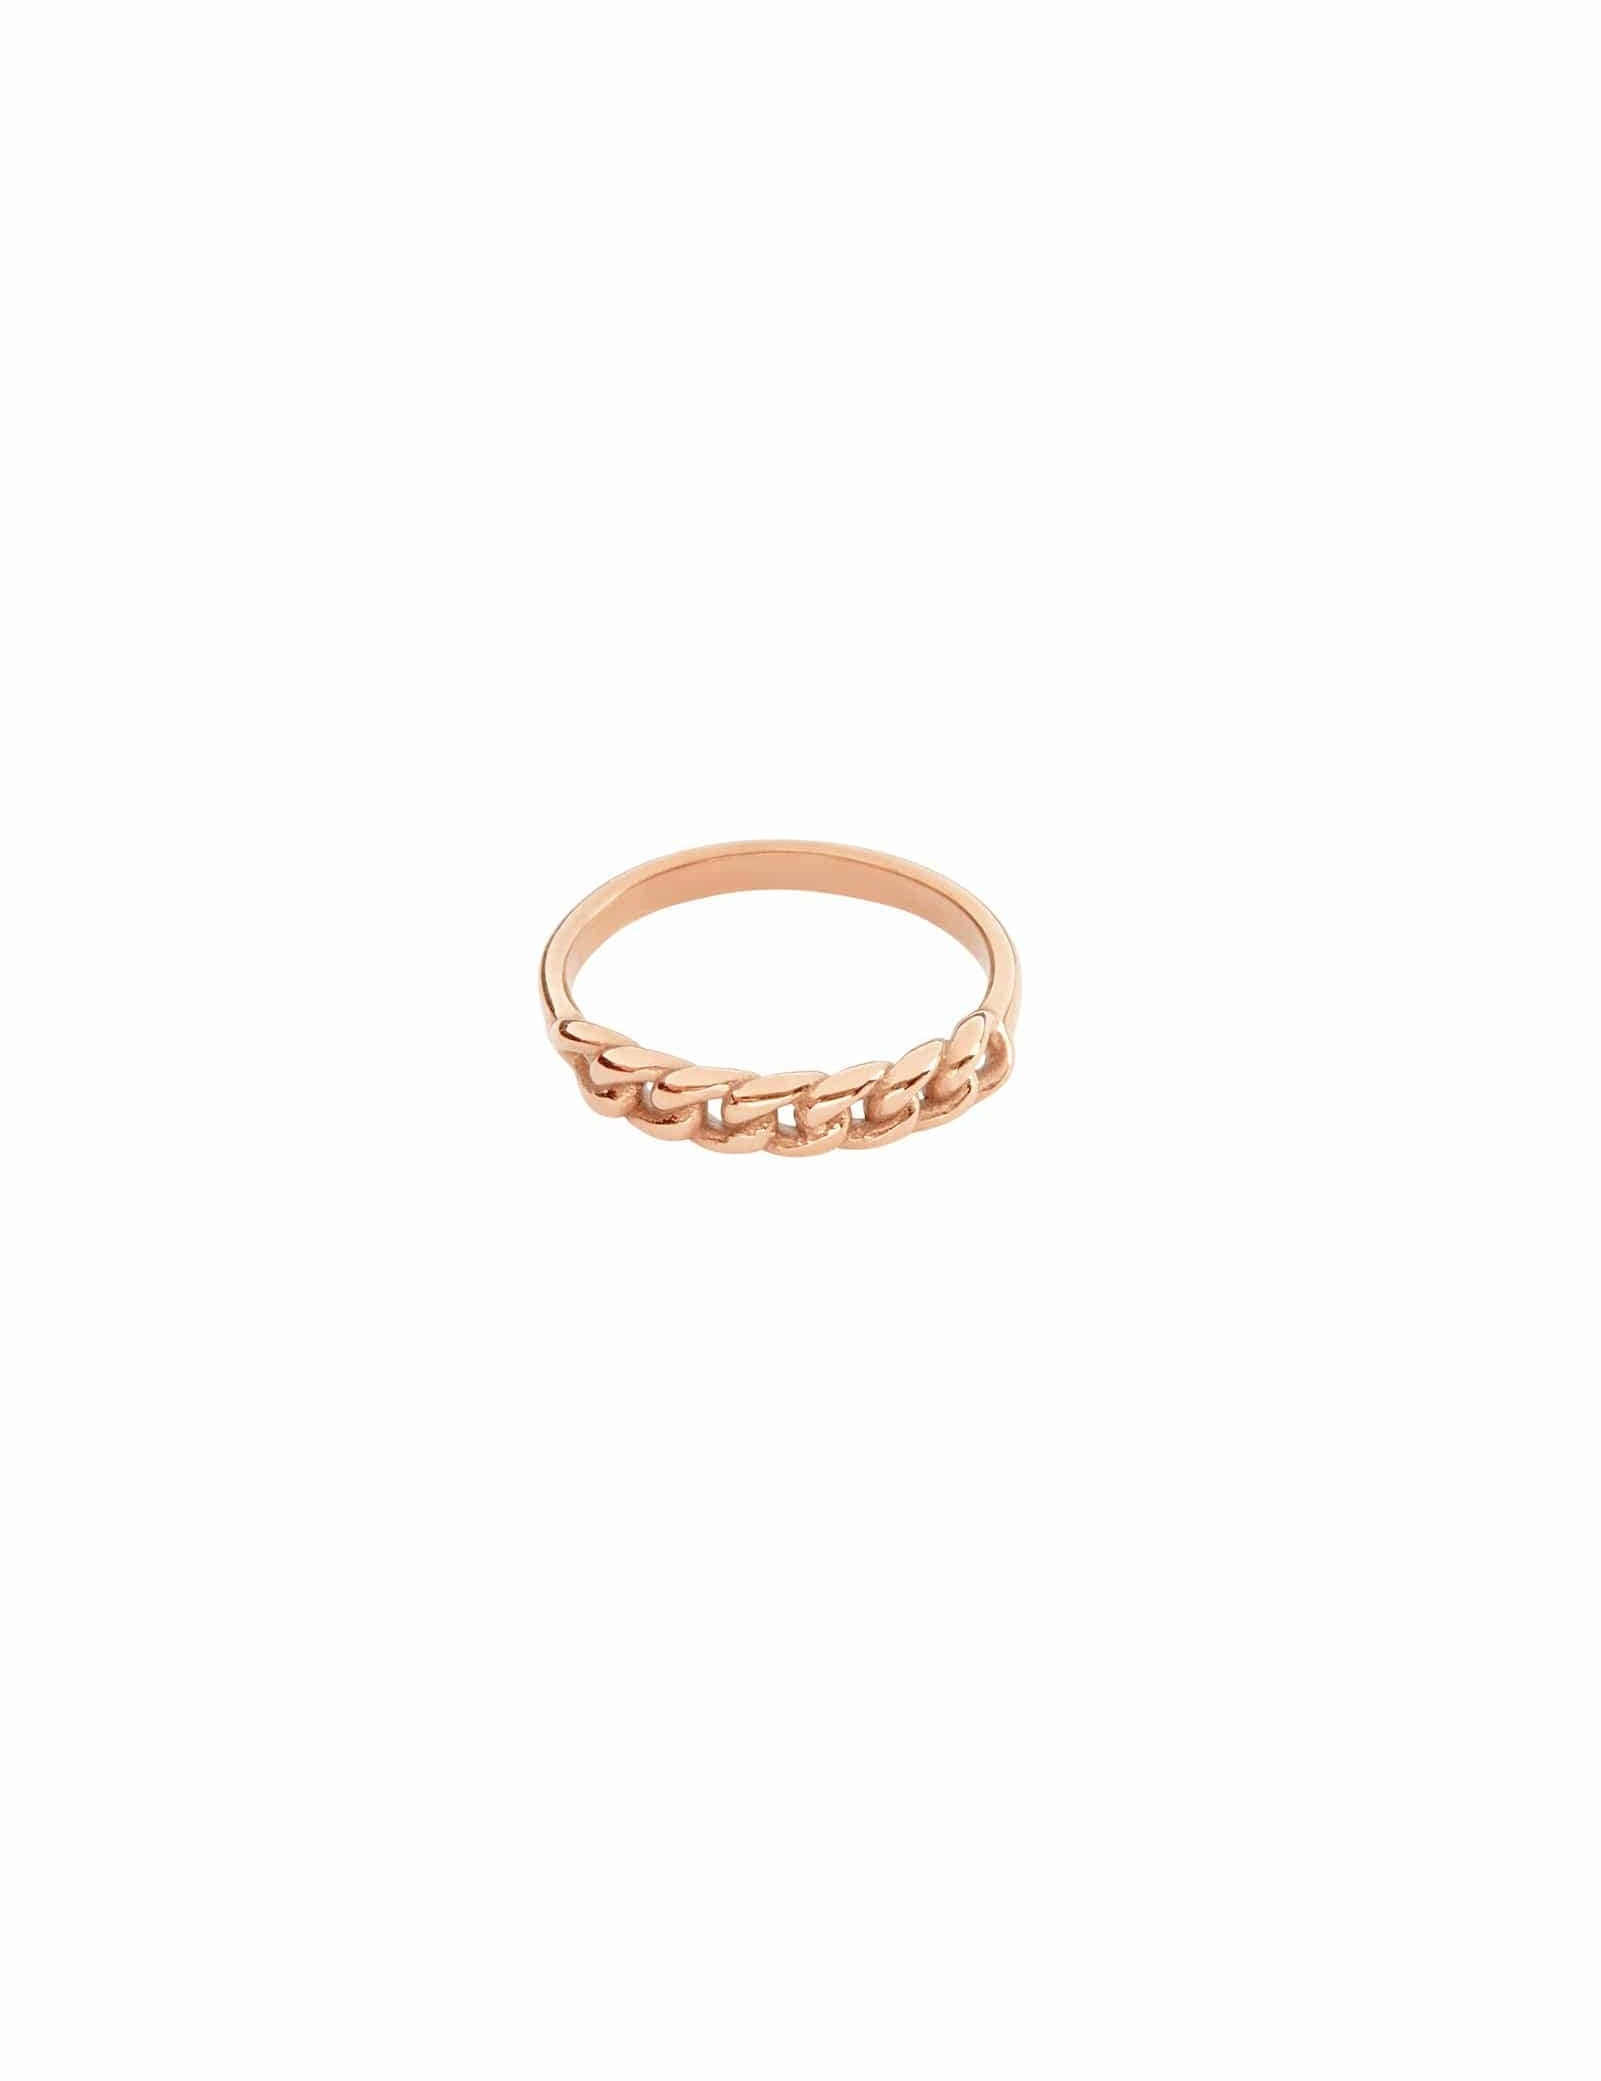 Pastiche  Ithaca Ring - R1223RG-N